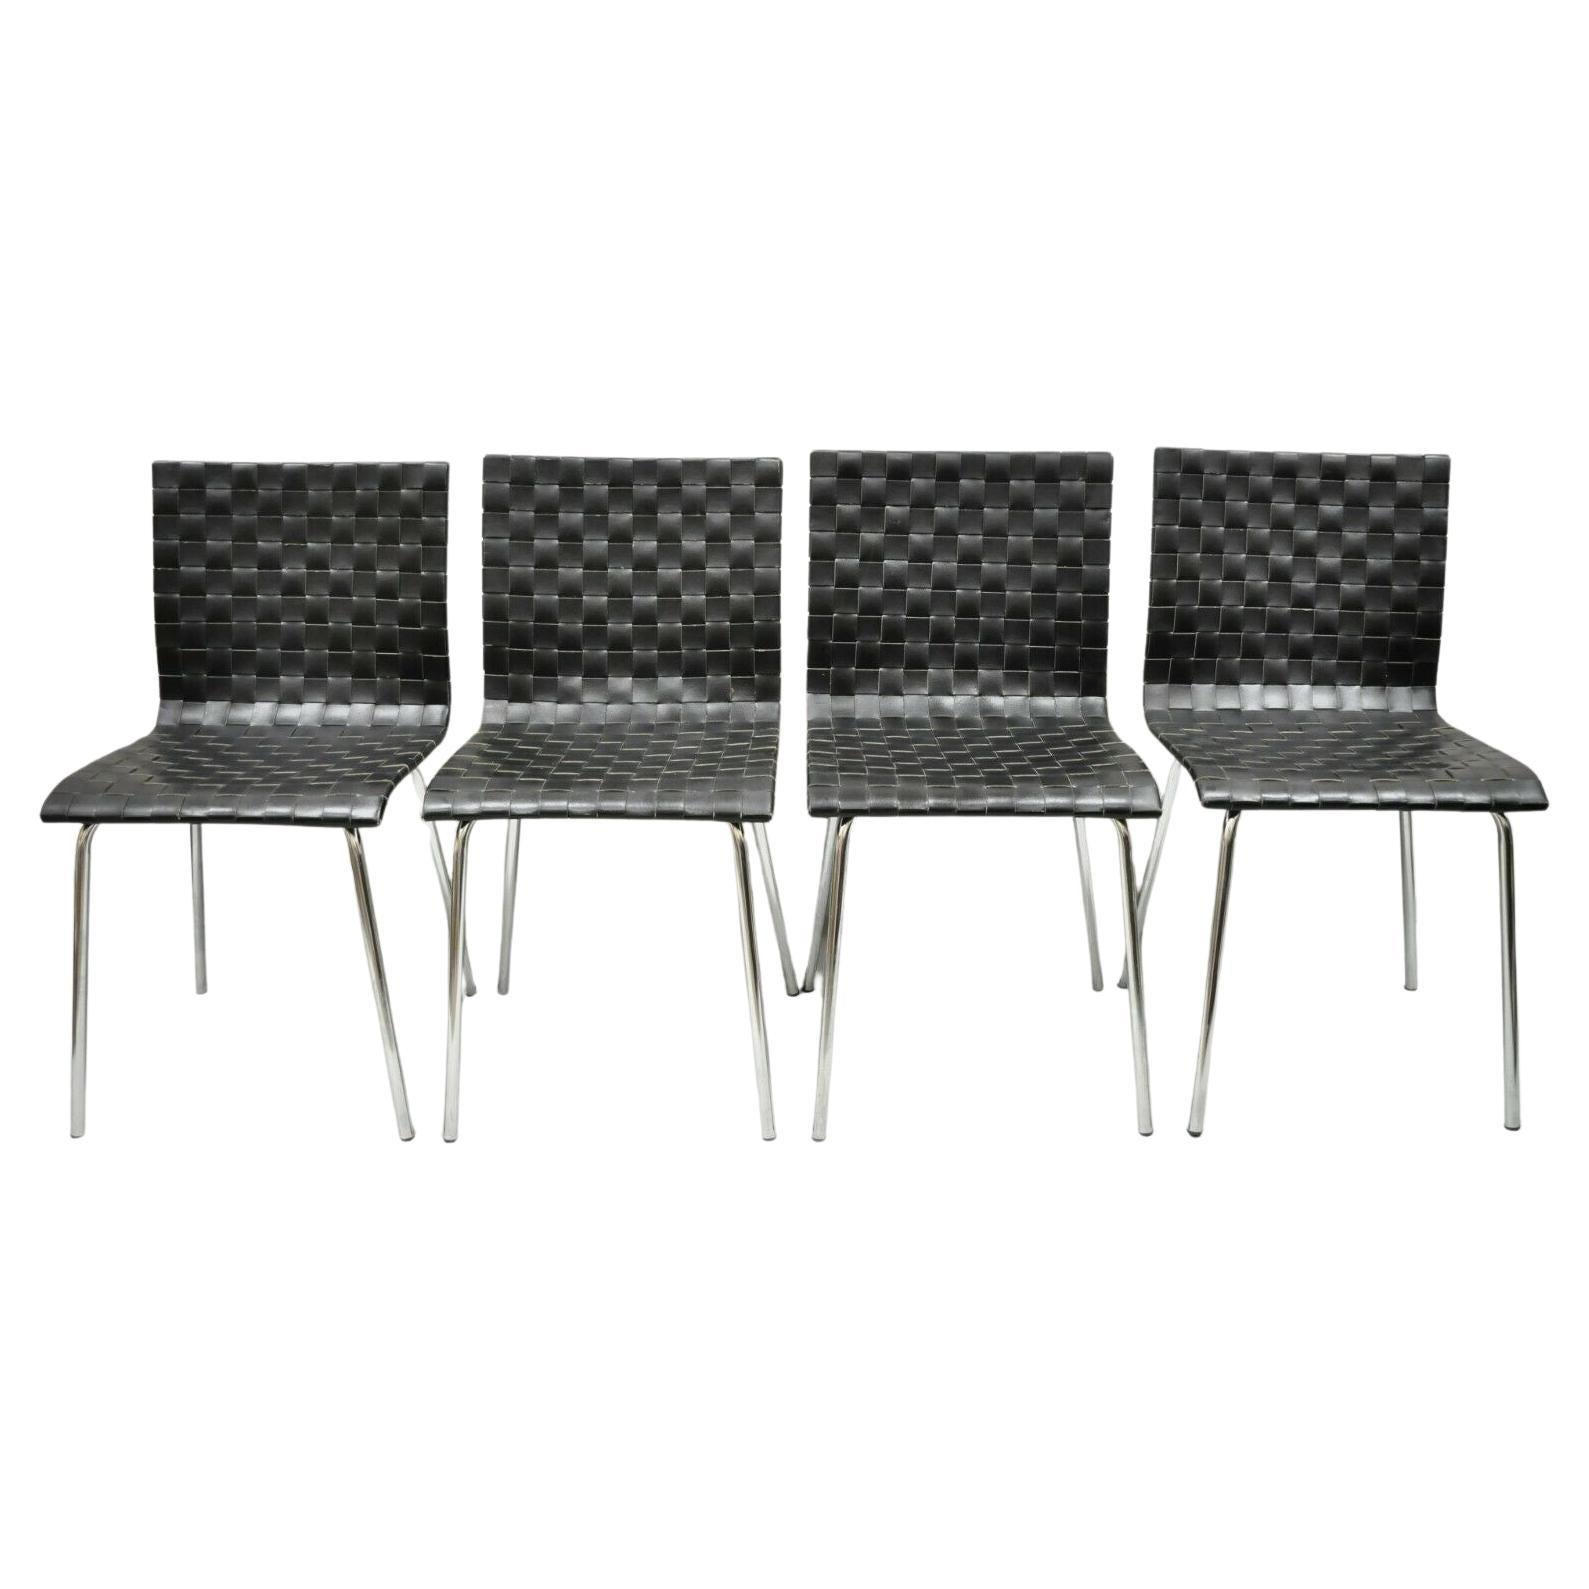 Modern Black Woven Leather Chrome Frame Dining Chairs - Set of 4 For Sale